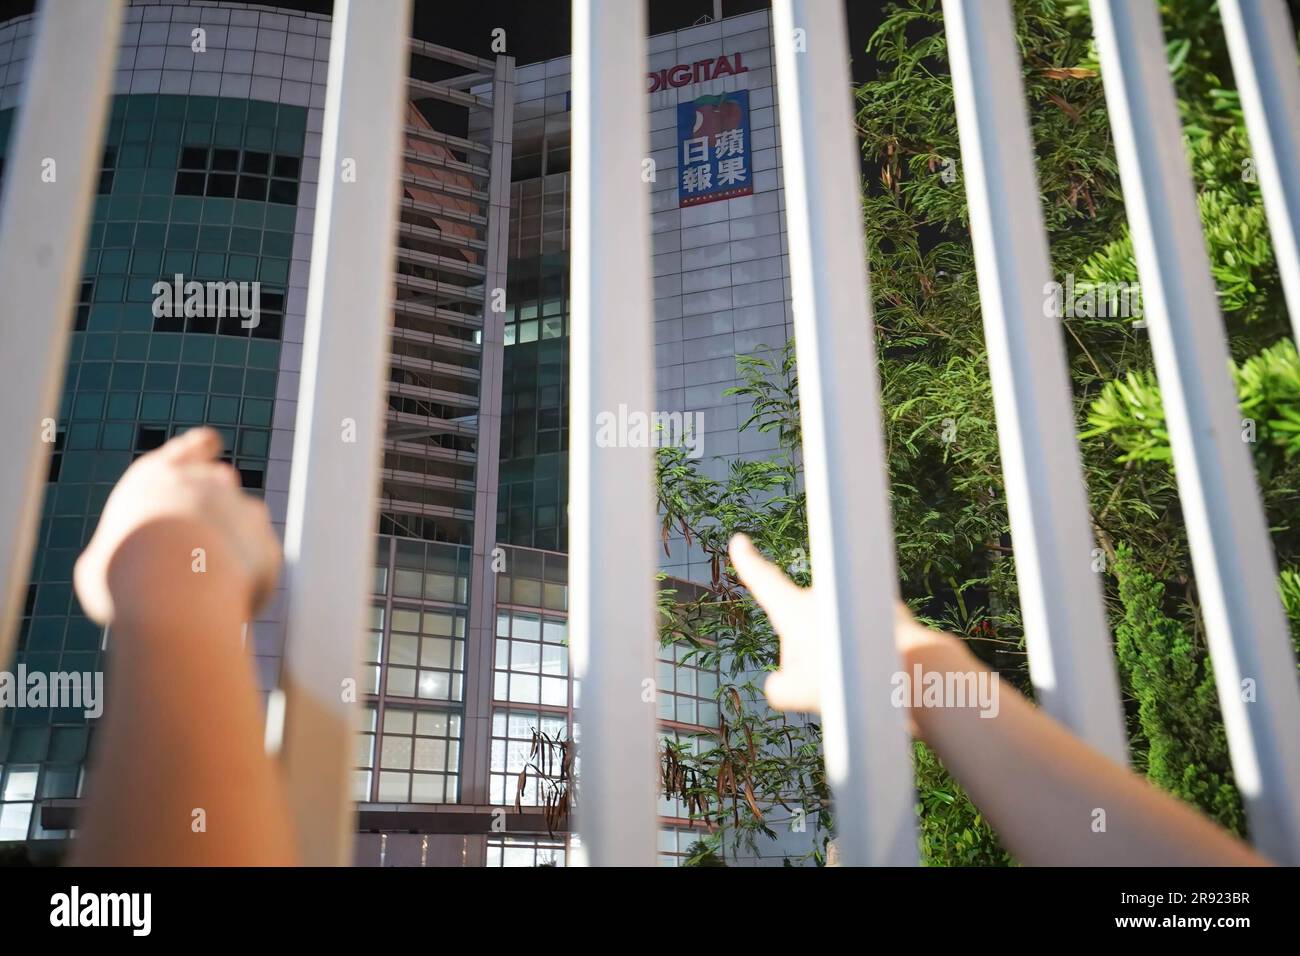 Two former journalists of Apple Daily use fingers to point out their offices before the closure. On the second anniversary of Apple Daily's closure, a group of former journalists gathered at the headquarters of the pro-democracy newspaper to commemorate the occasion. Despite the passage of time, the memories of the newspaper's forced closure under the National Security Law are still fresh in their minds. The journalists, fill with a sense of nostalgia and resilience, stand outside the familiar building and take photos to symbolize their unwavering commitment to press freedom and democracy in H Stock Photo